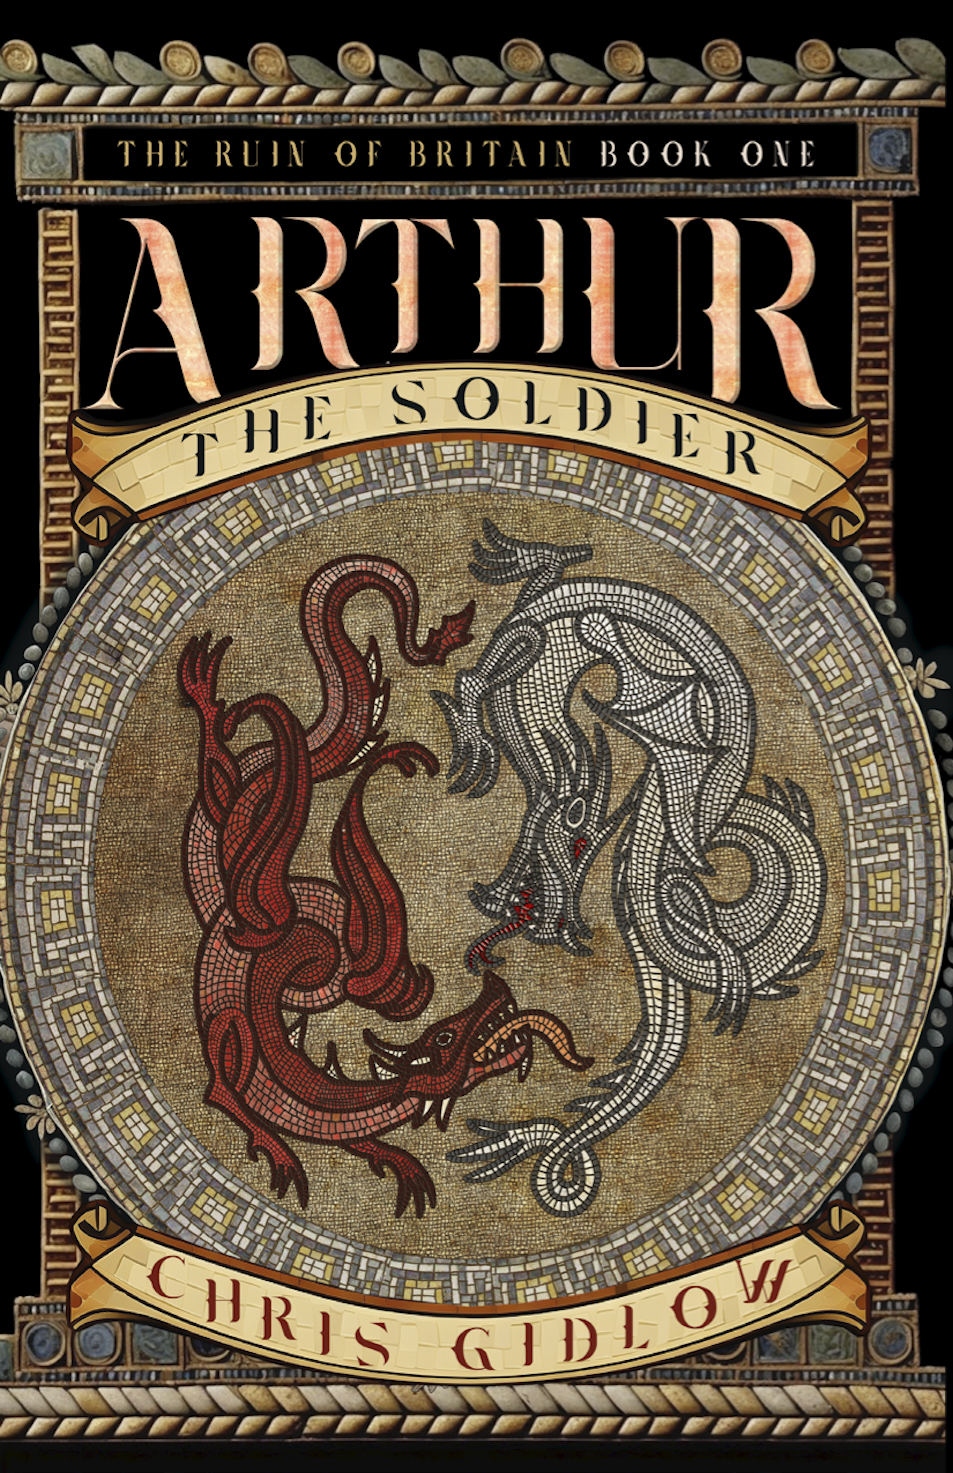 [Chaosium] A special pre-release at Chaosium Con Australia! - Arthur the Soldier, the first book in our new Pendragon Fiction line